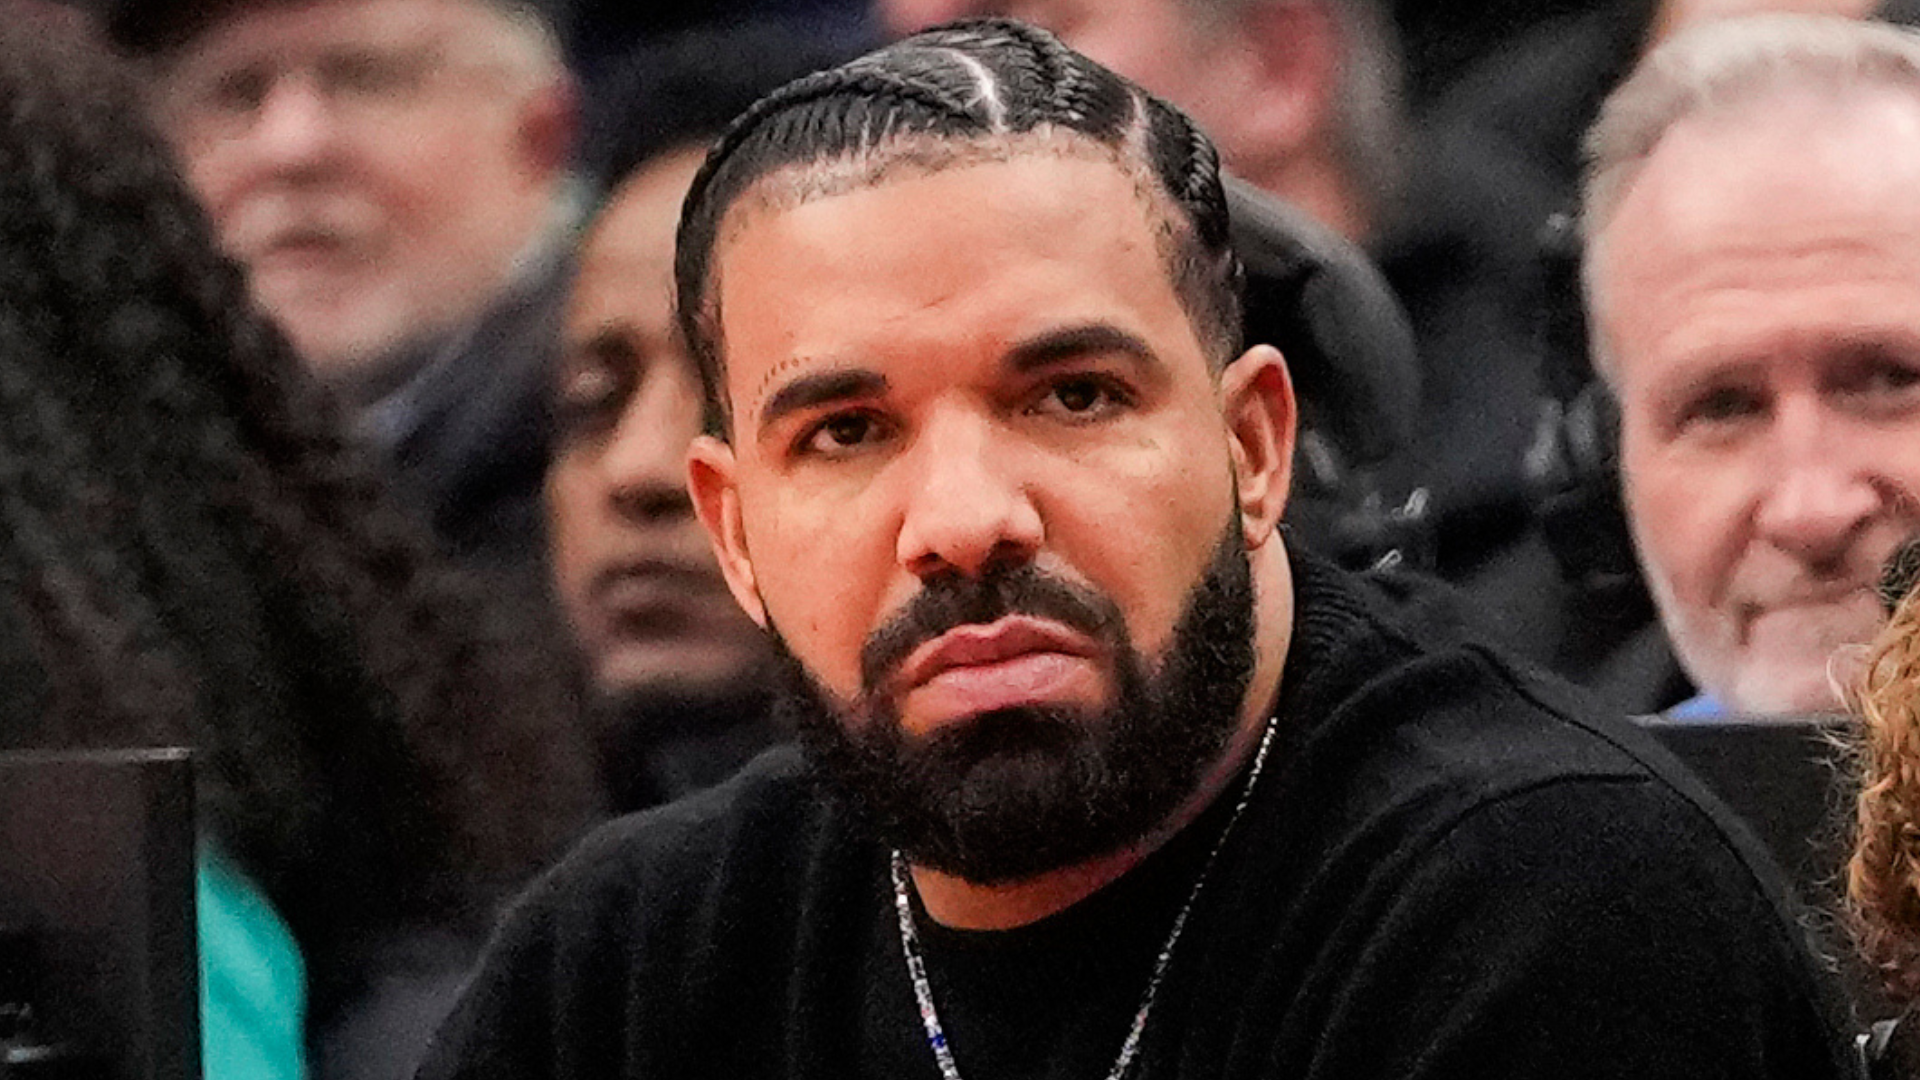 Drake’s Name Mention Sparks Boos From Toronto Crowd at Limp Bizkit Concert